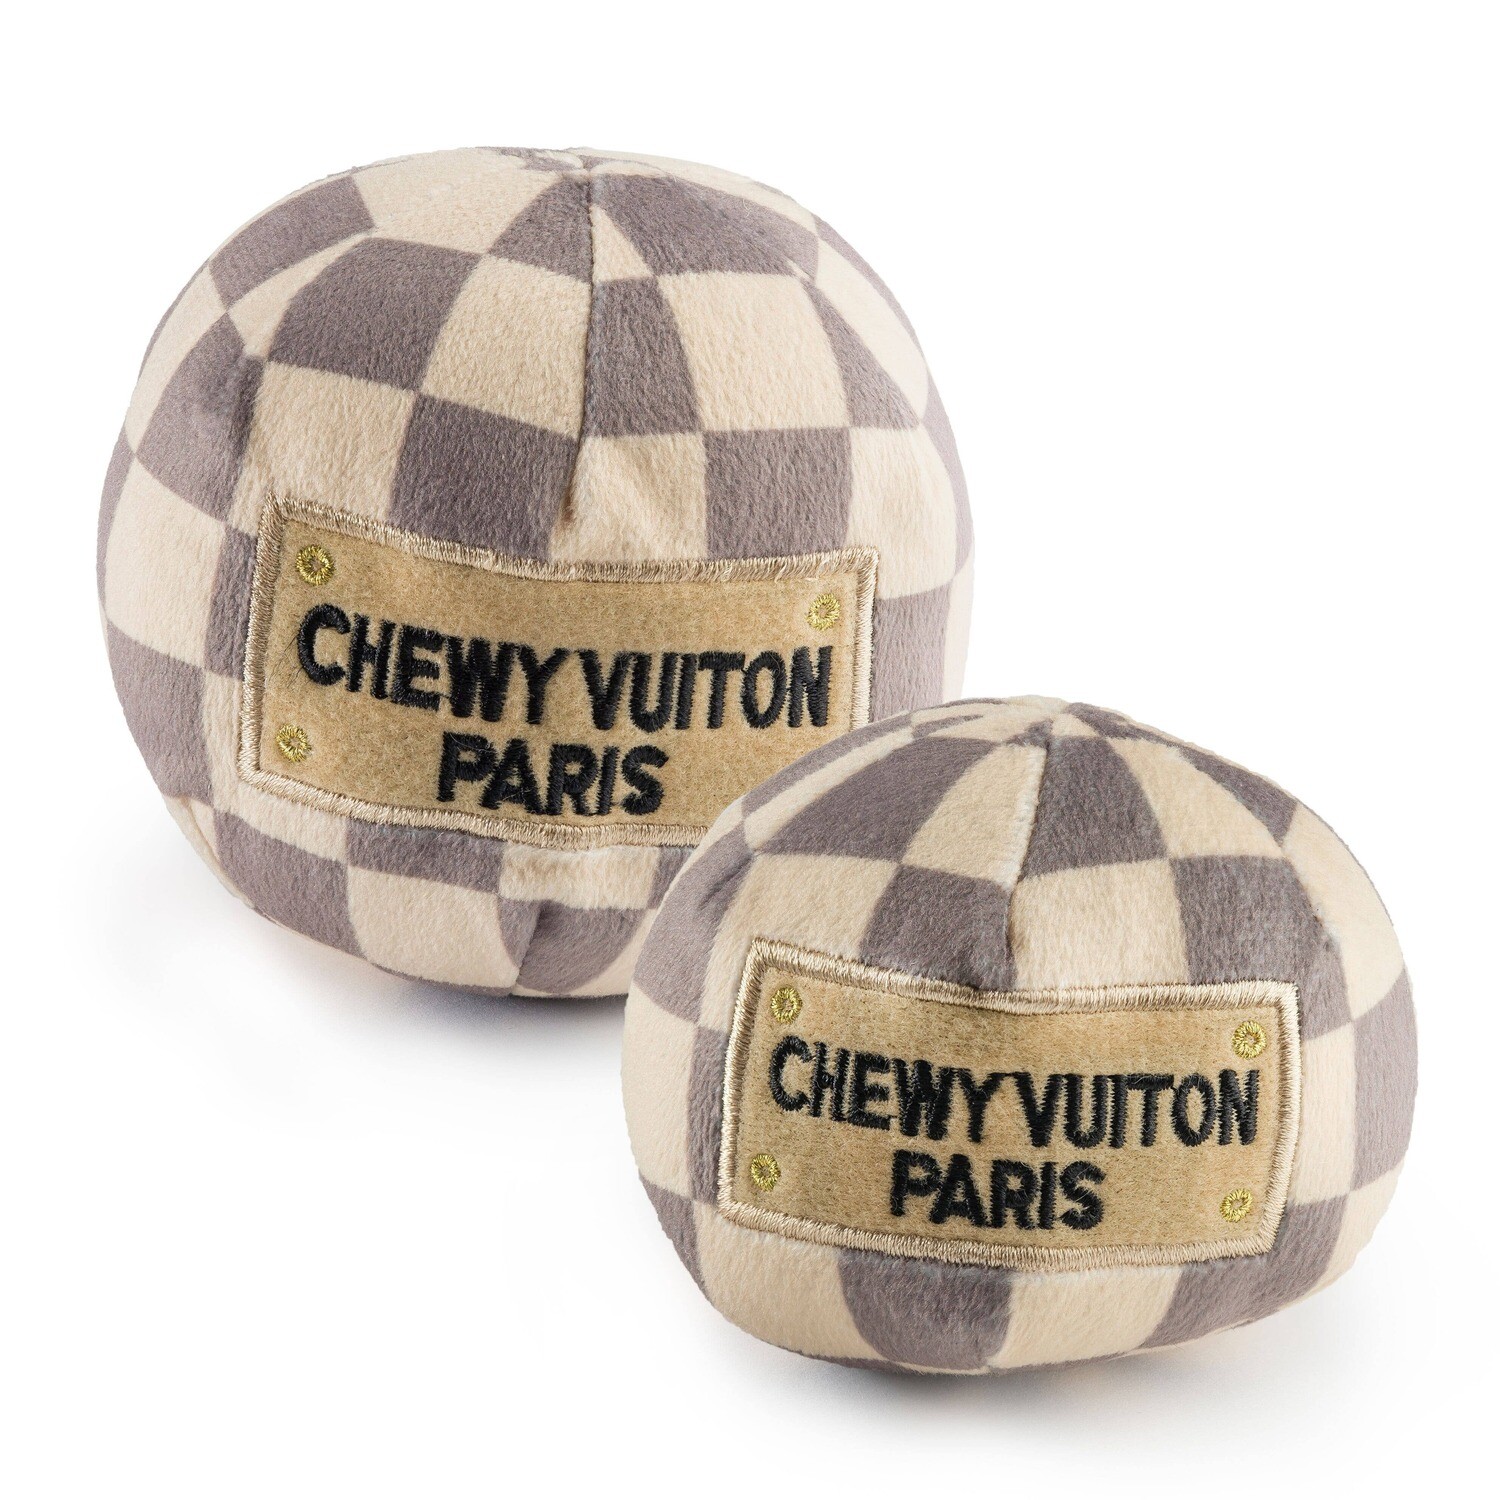 Chewy Vuiton Dog Toy Ball